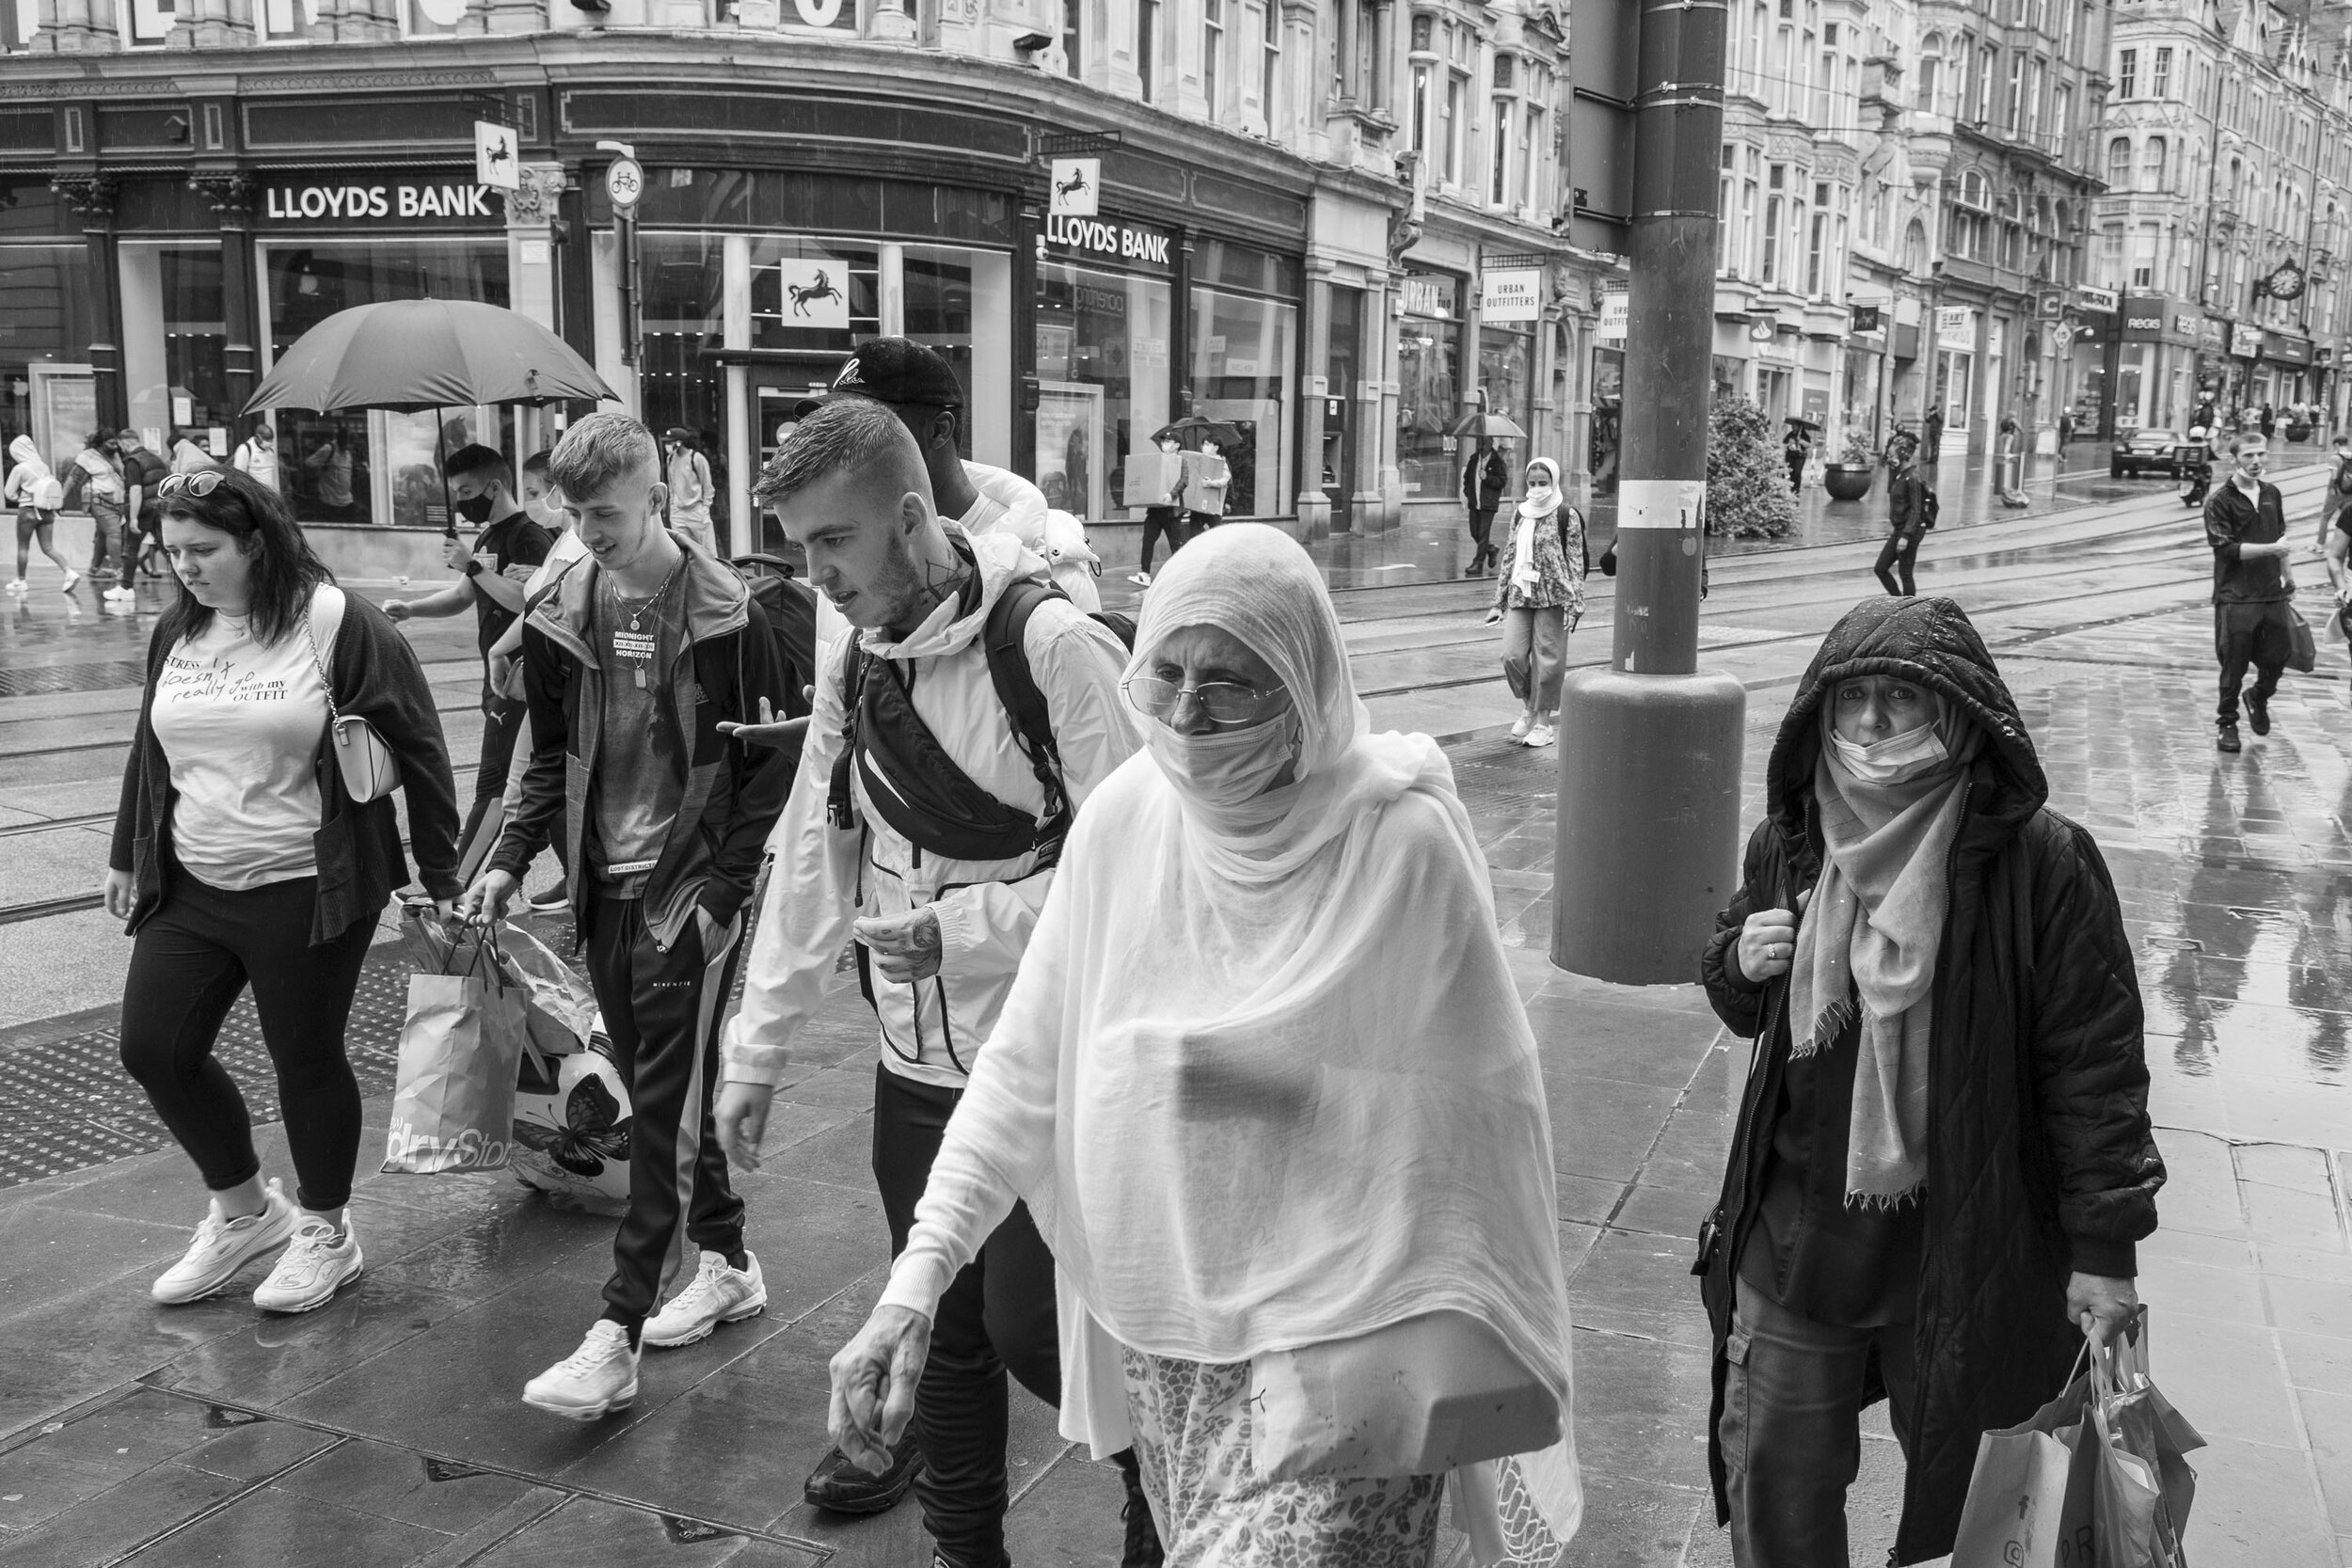  Shoppers in the rain. August 2020. City Centre. 